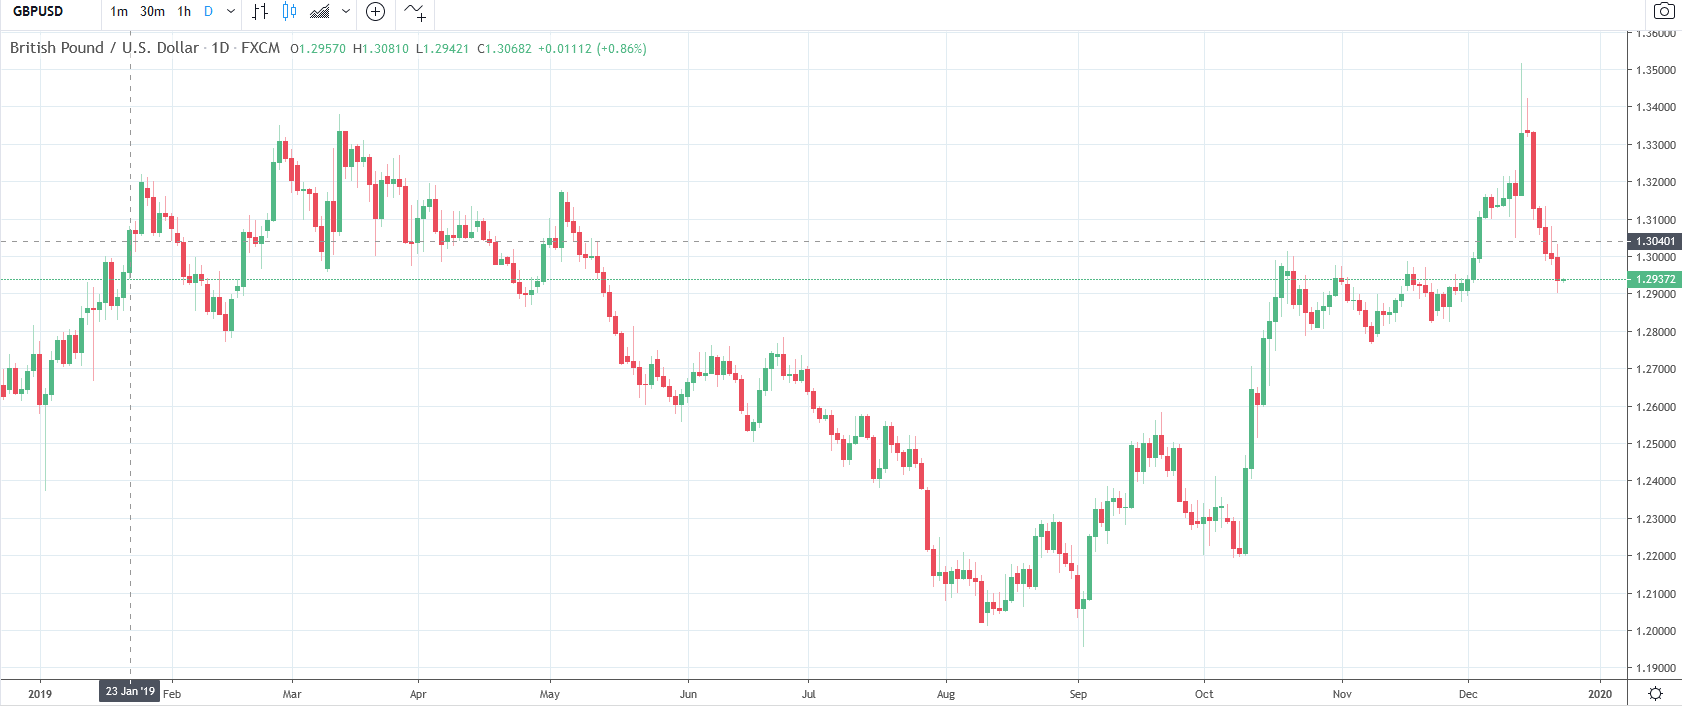 Standard Chartered gbp/USD sterling projections in 2020